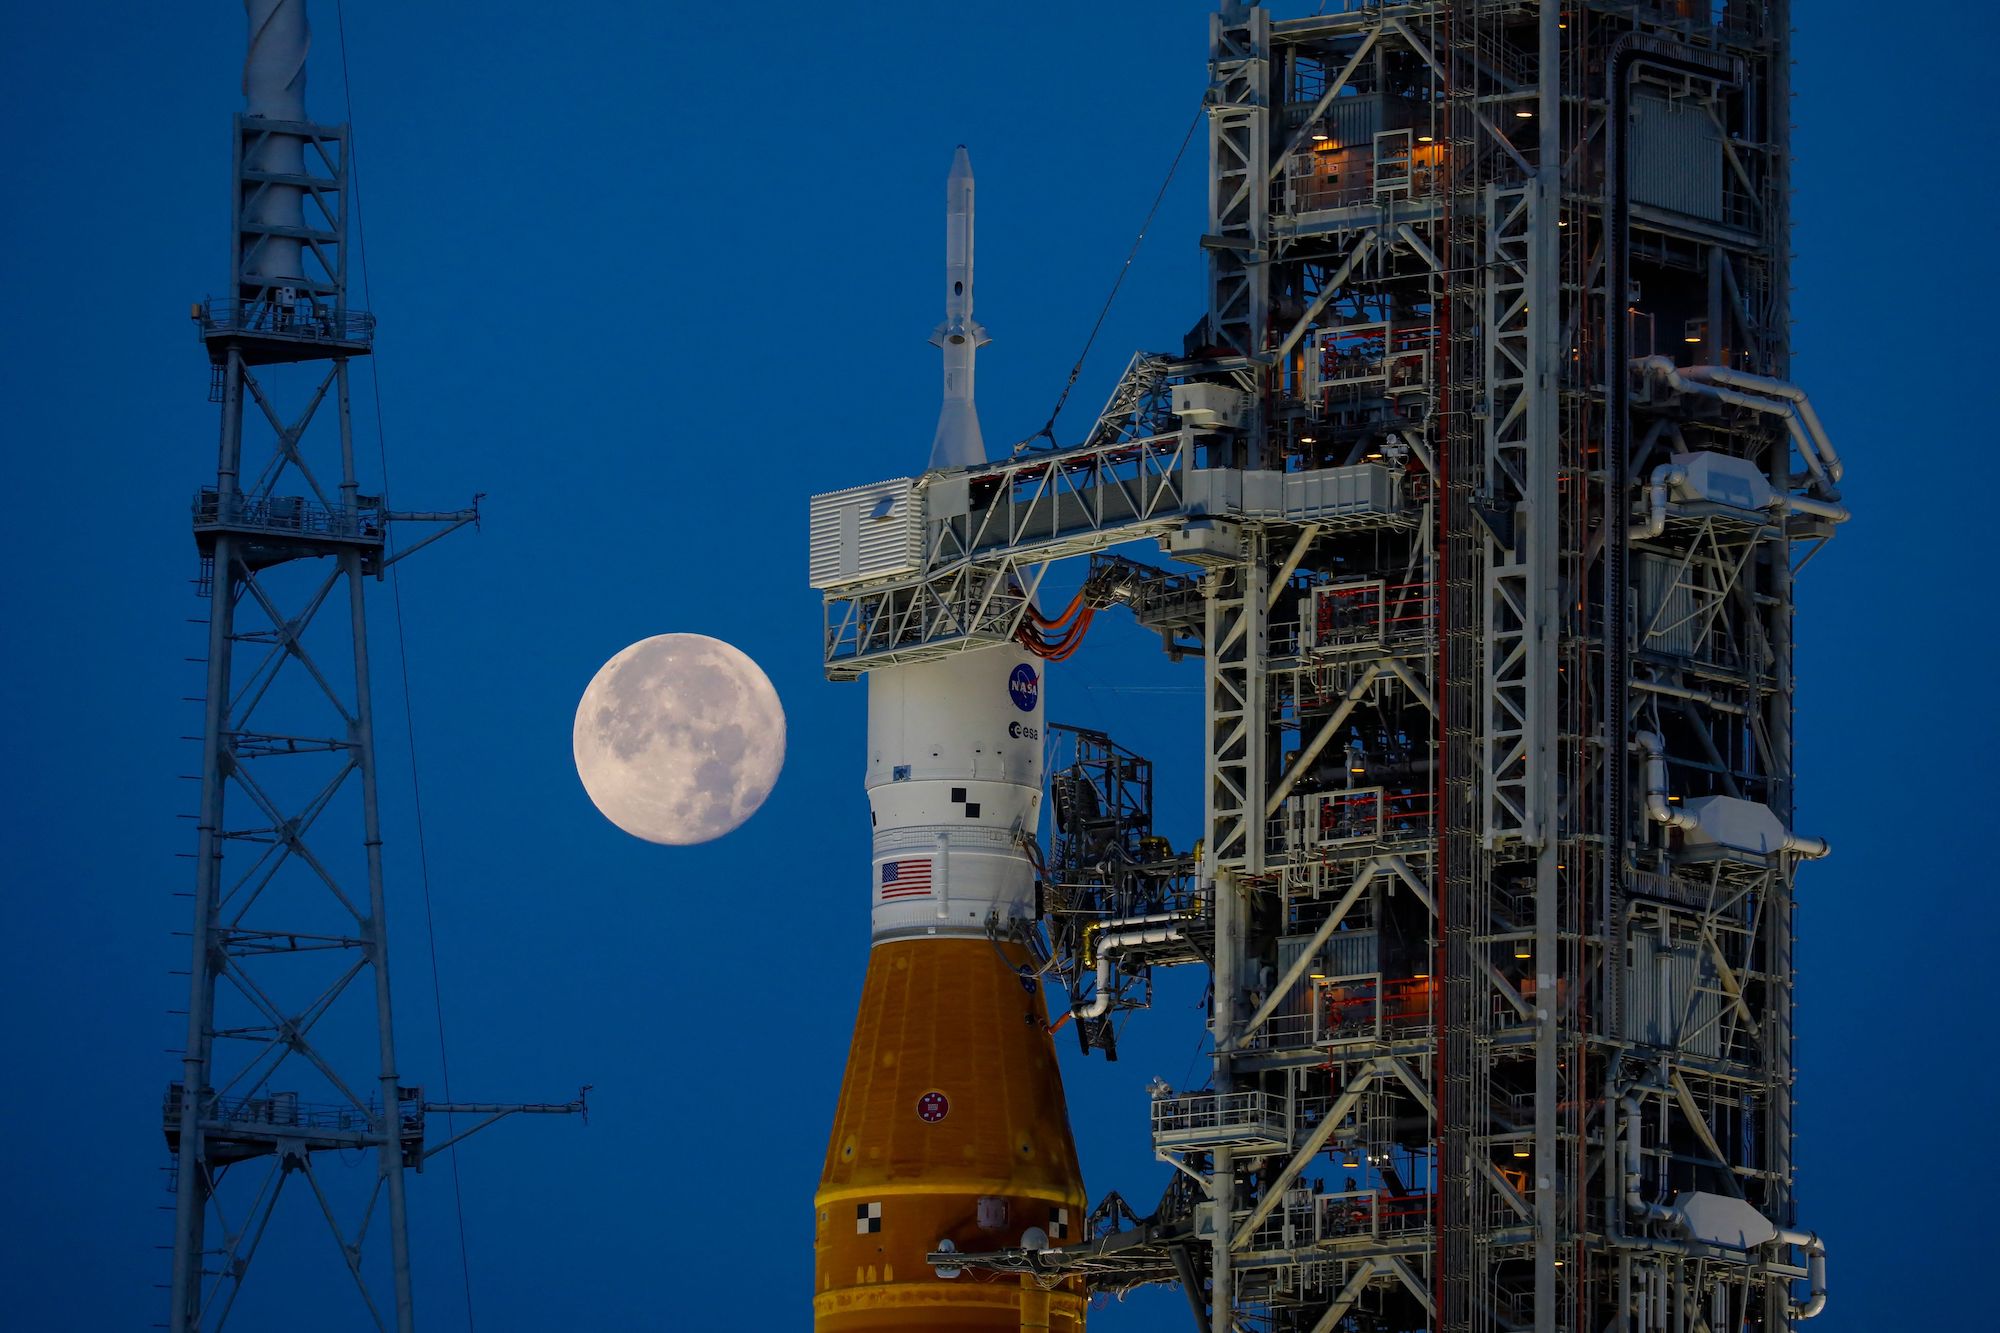 NASAs Artemis I Moon rocket sits at Launch Pad Complex 39B at Kennedy Space Center